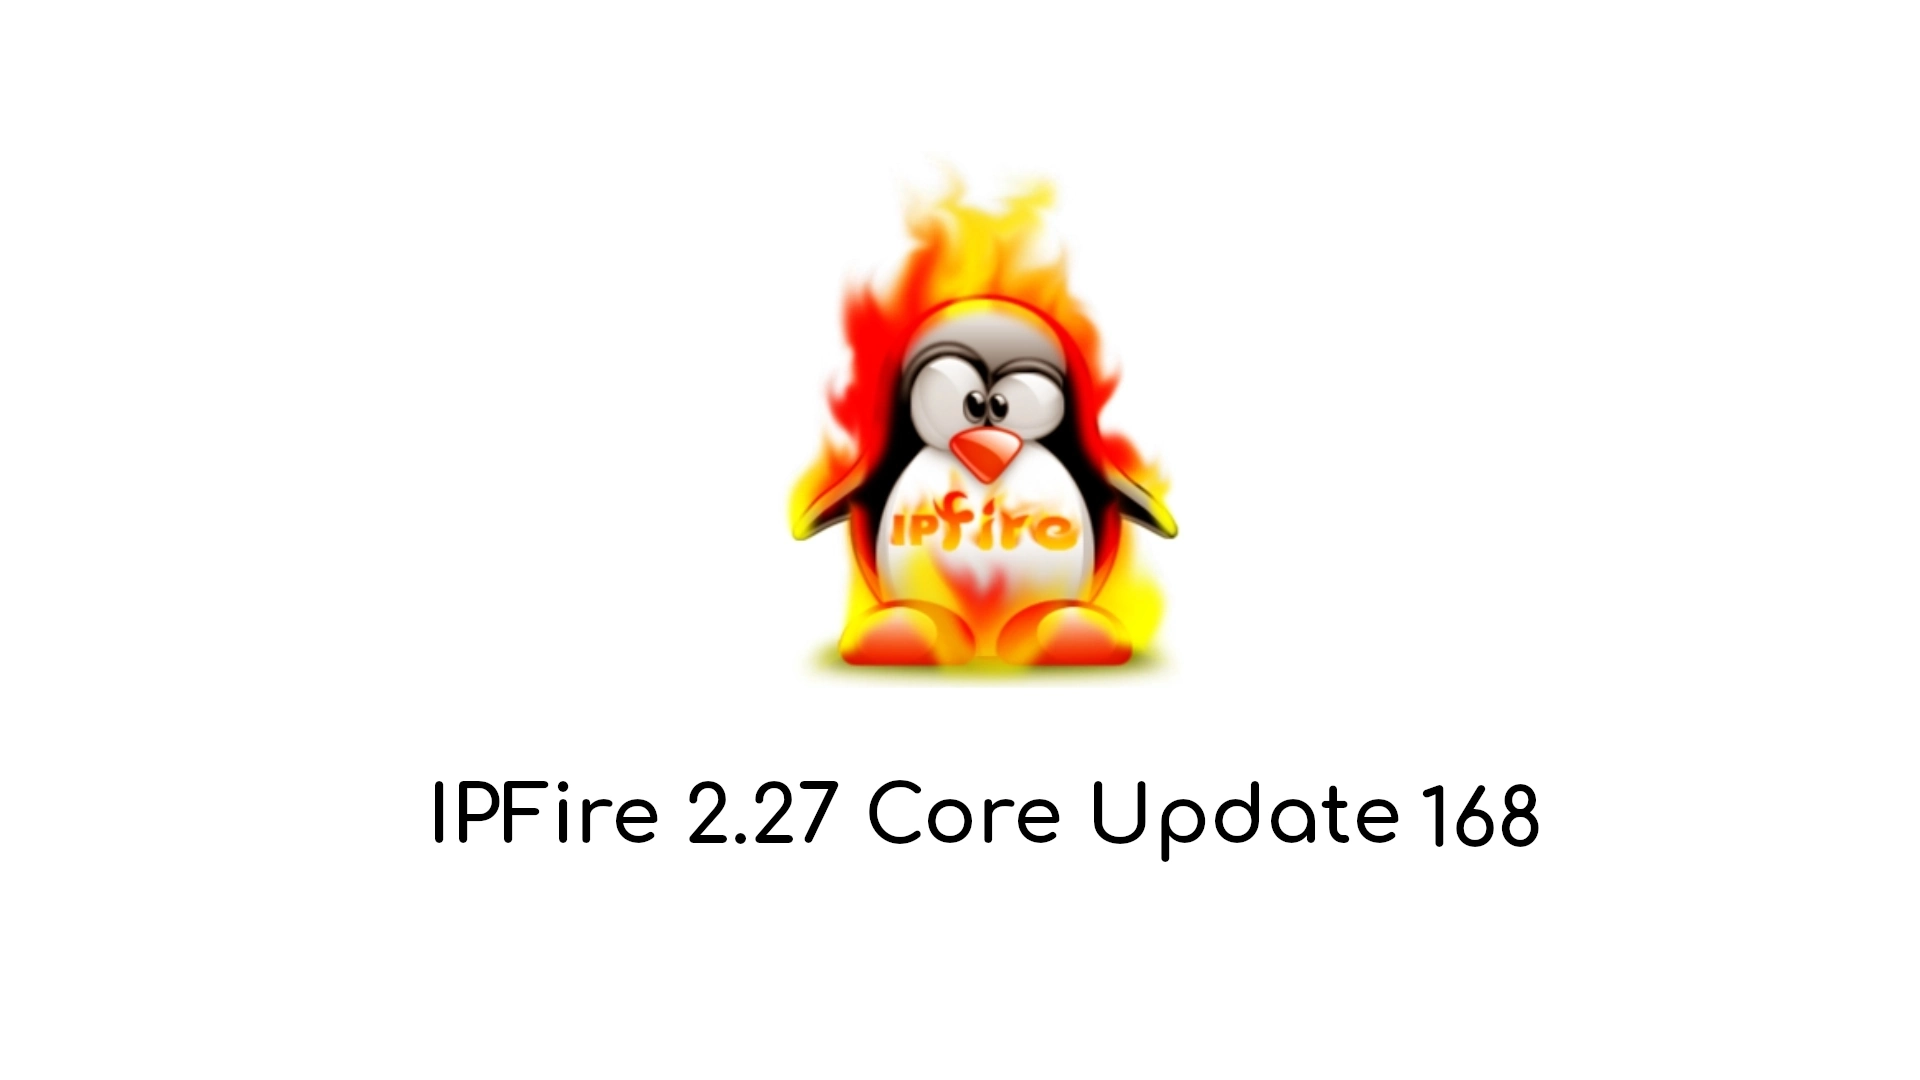 IPFire Linux Firewall Distro Improves Its Intrusion Prevention System and Security